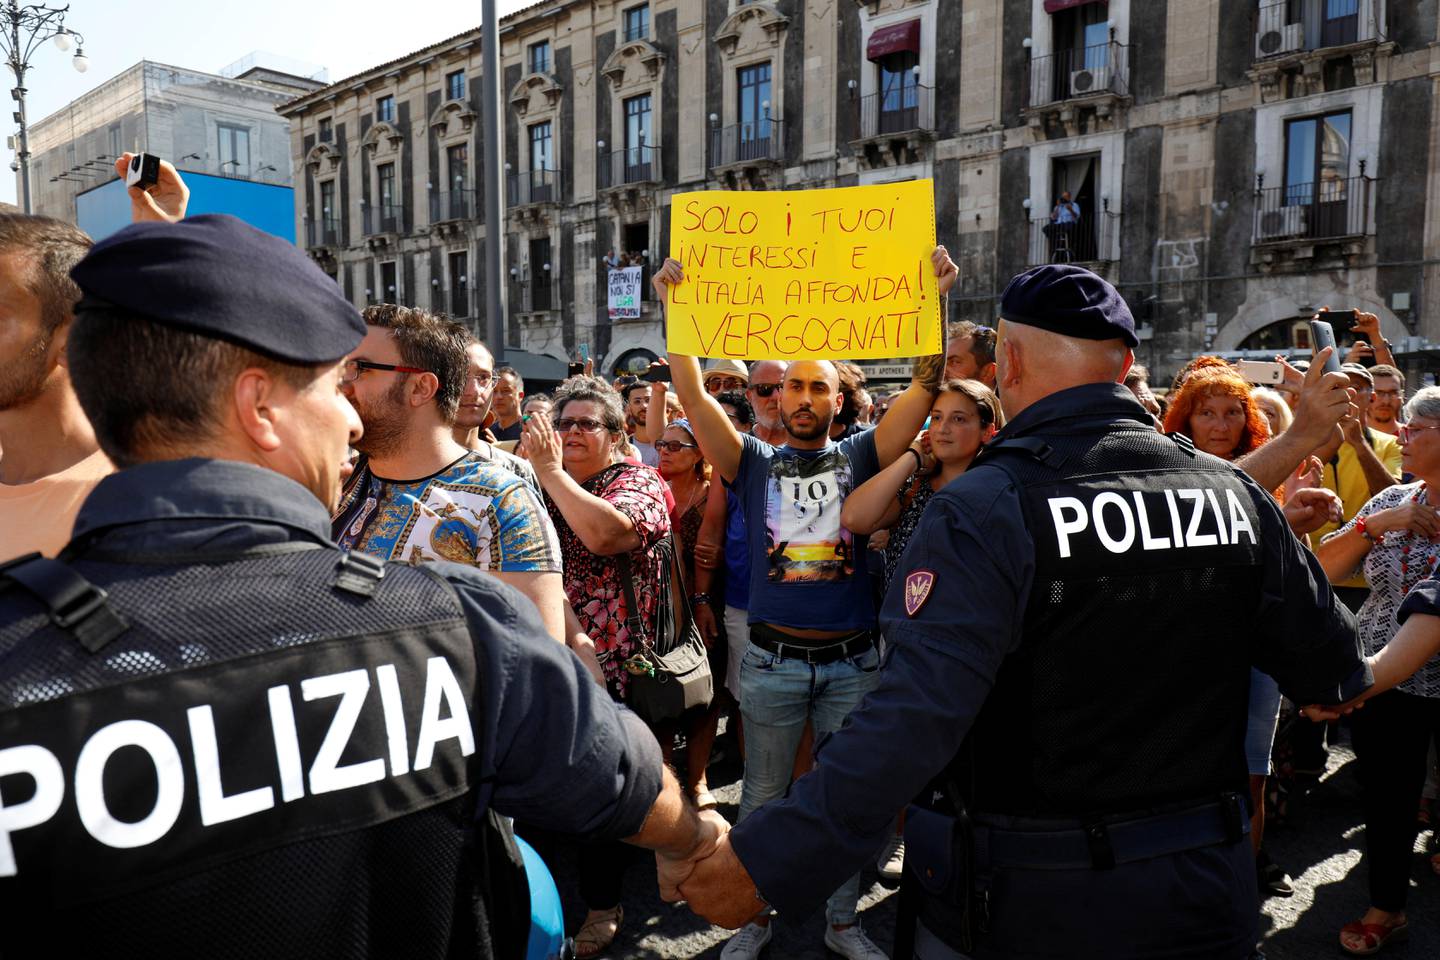 REFILE - ADDING TRANSLATION People protest against Italian Interior Minister and leader of the League party Matteo Salvini in Catania, Italy, August 11, 2019. The banner reads "Just your interests and Italy sinks! Shame on you." REUTERS/Antonio Parrinello